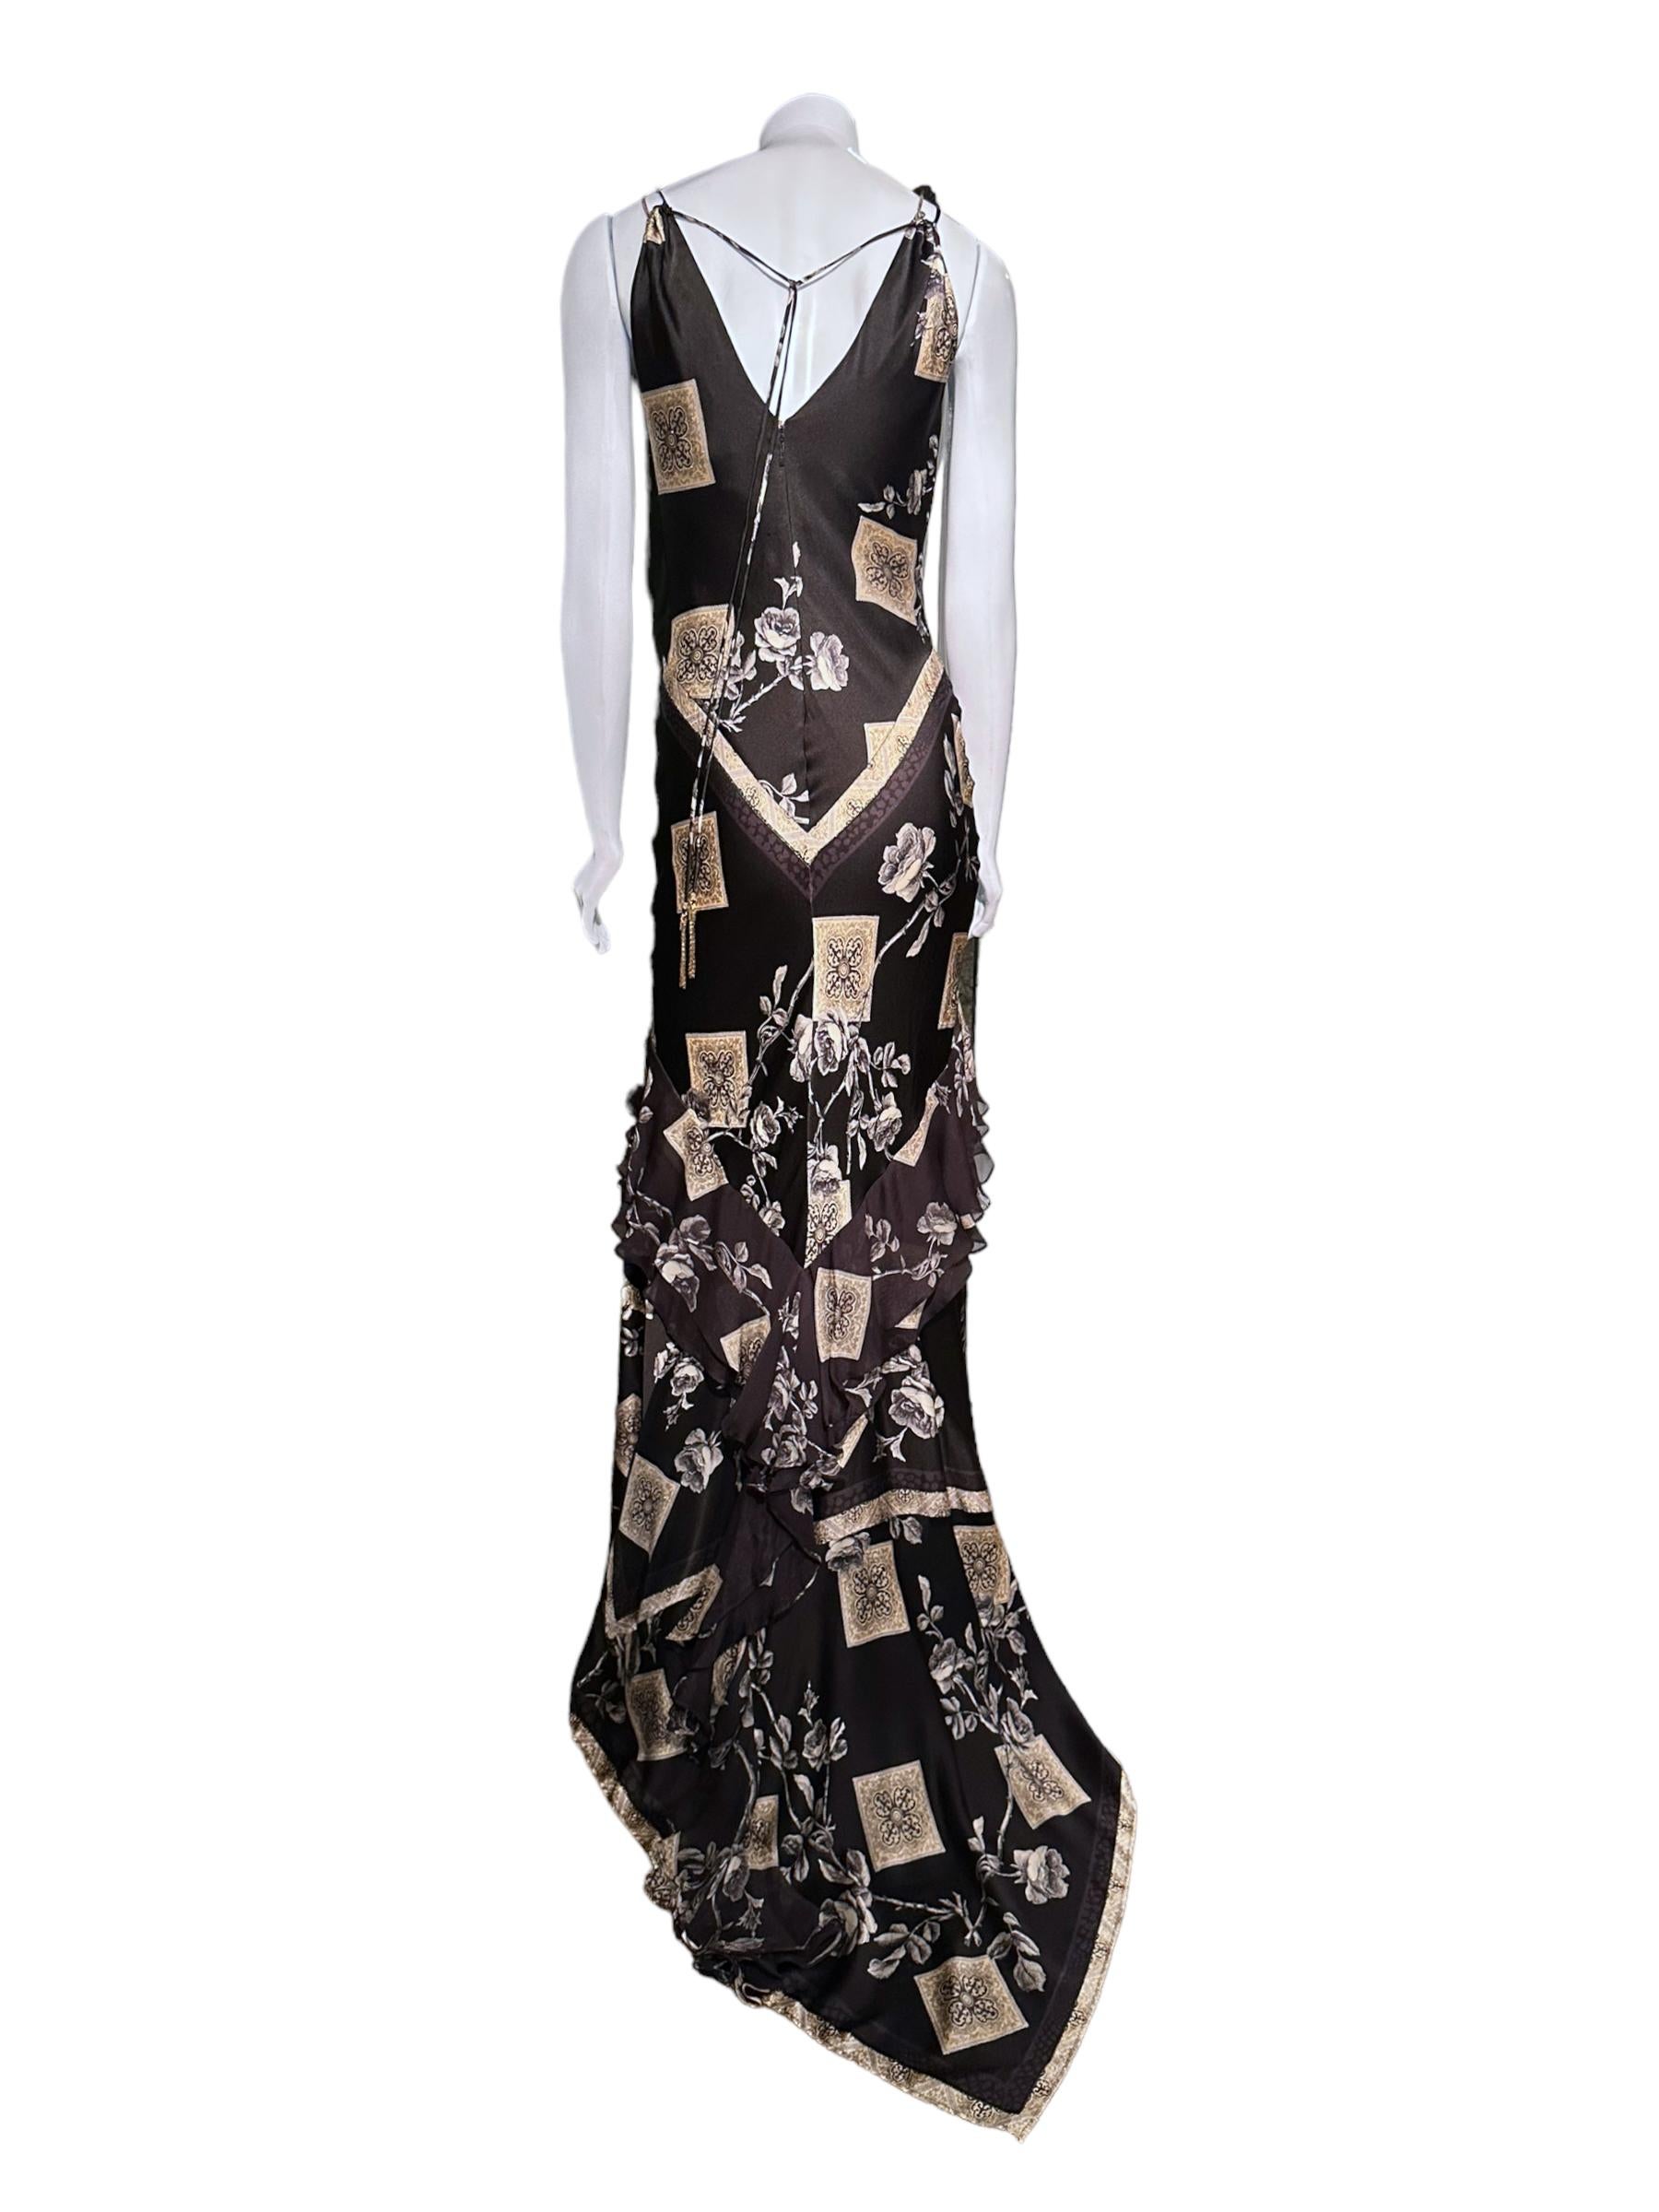 
Bias cut silk
Dramatic but functional train
Signature Cavalli glittery silk fabric 
V-neckline
Adjustable with tie-up straps - hardware charms at the end
Zip-up back (invisible)
long handkerchief style train
Ruffle details

Pre-owned vintage